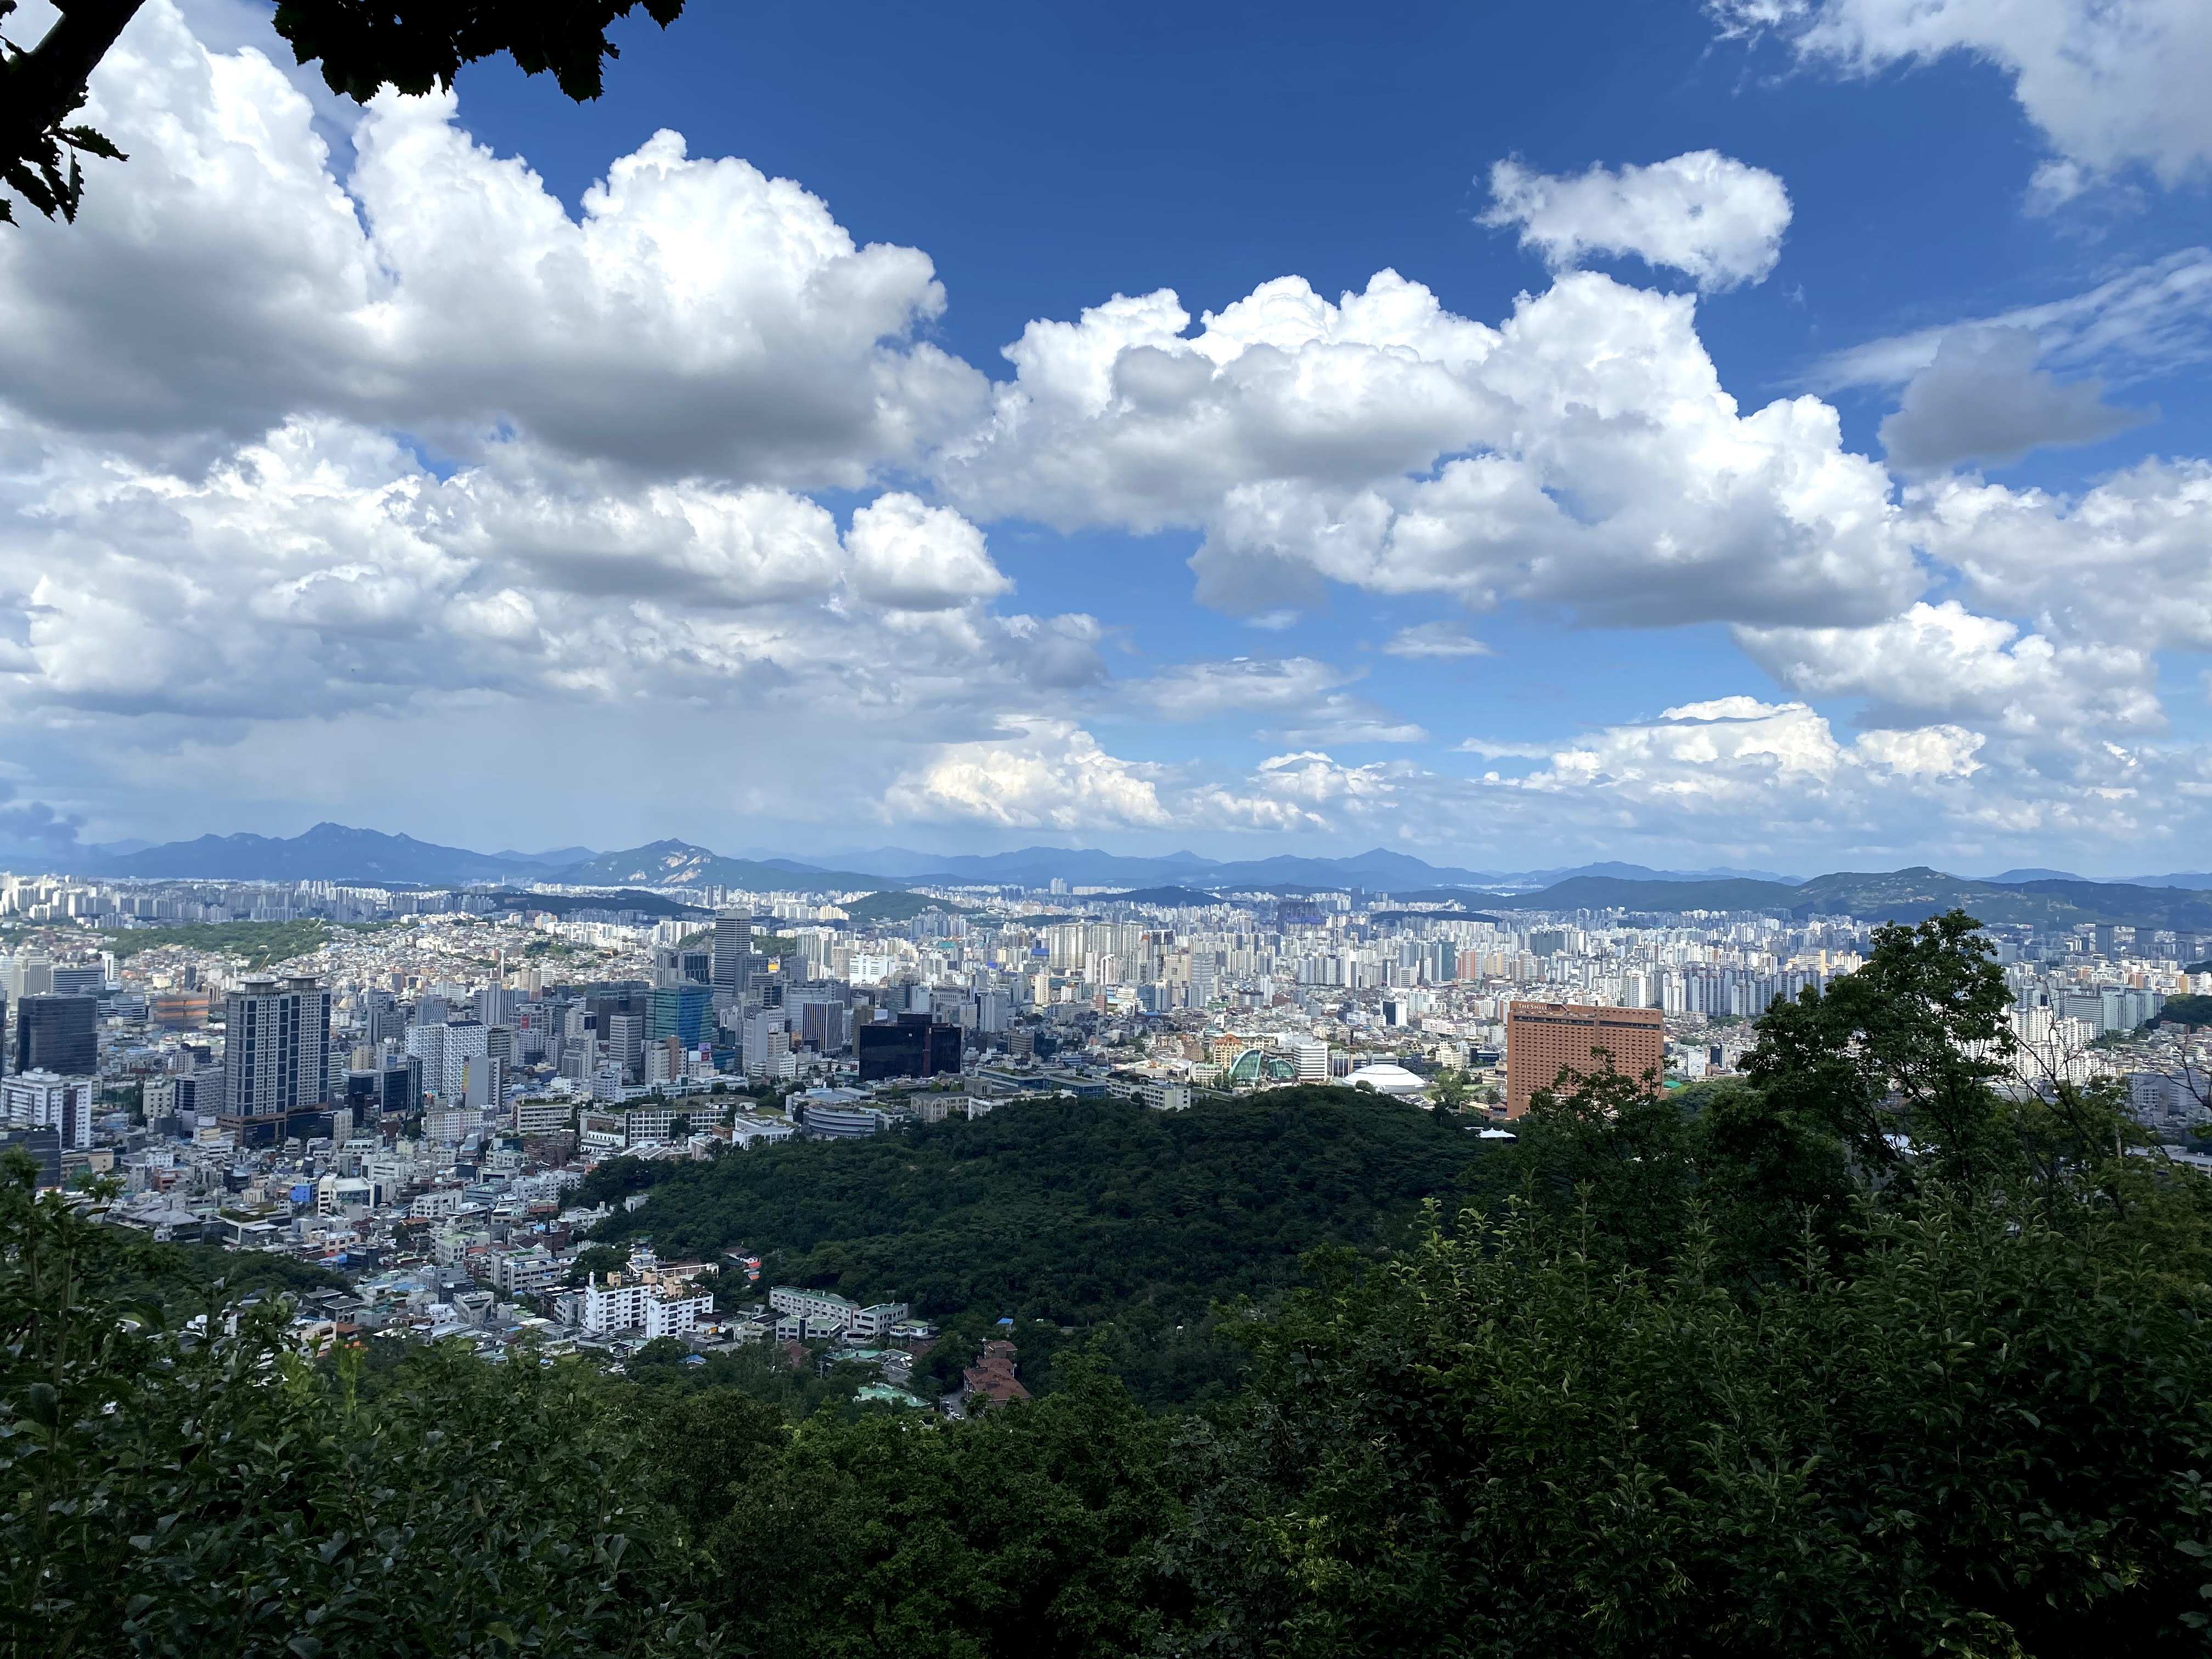  While studying abroad in Seoul, South Korea, senior Kelsey Eihausen captured the cityscape from the park near the North Seoul Tower. The Education Abroad Office works closely with students to determine study abroad experiences based on the university’s travel policy and U.S. Department of State travel advisories due to the COVID-19 pandemic.